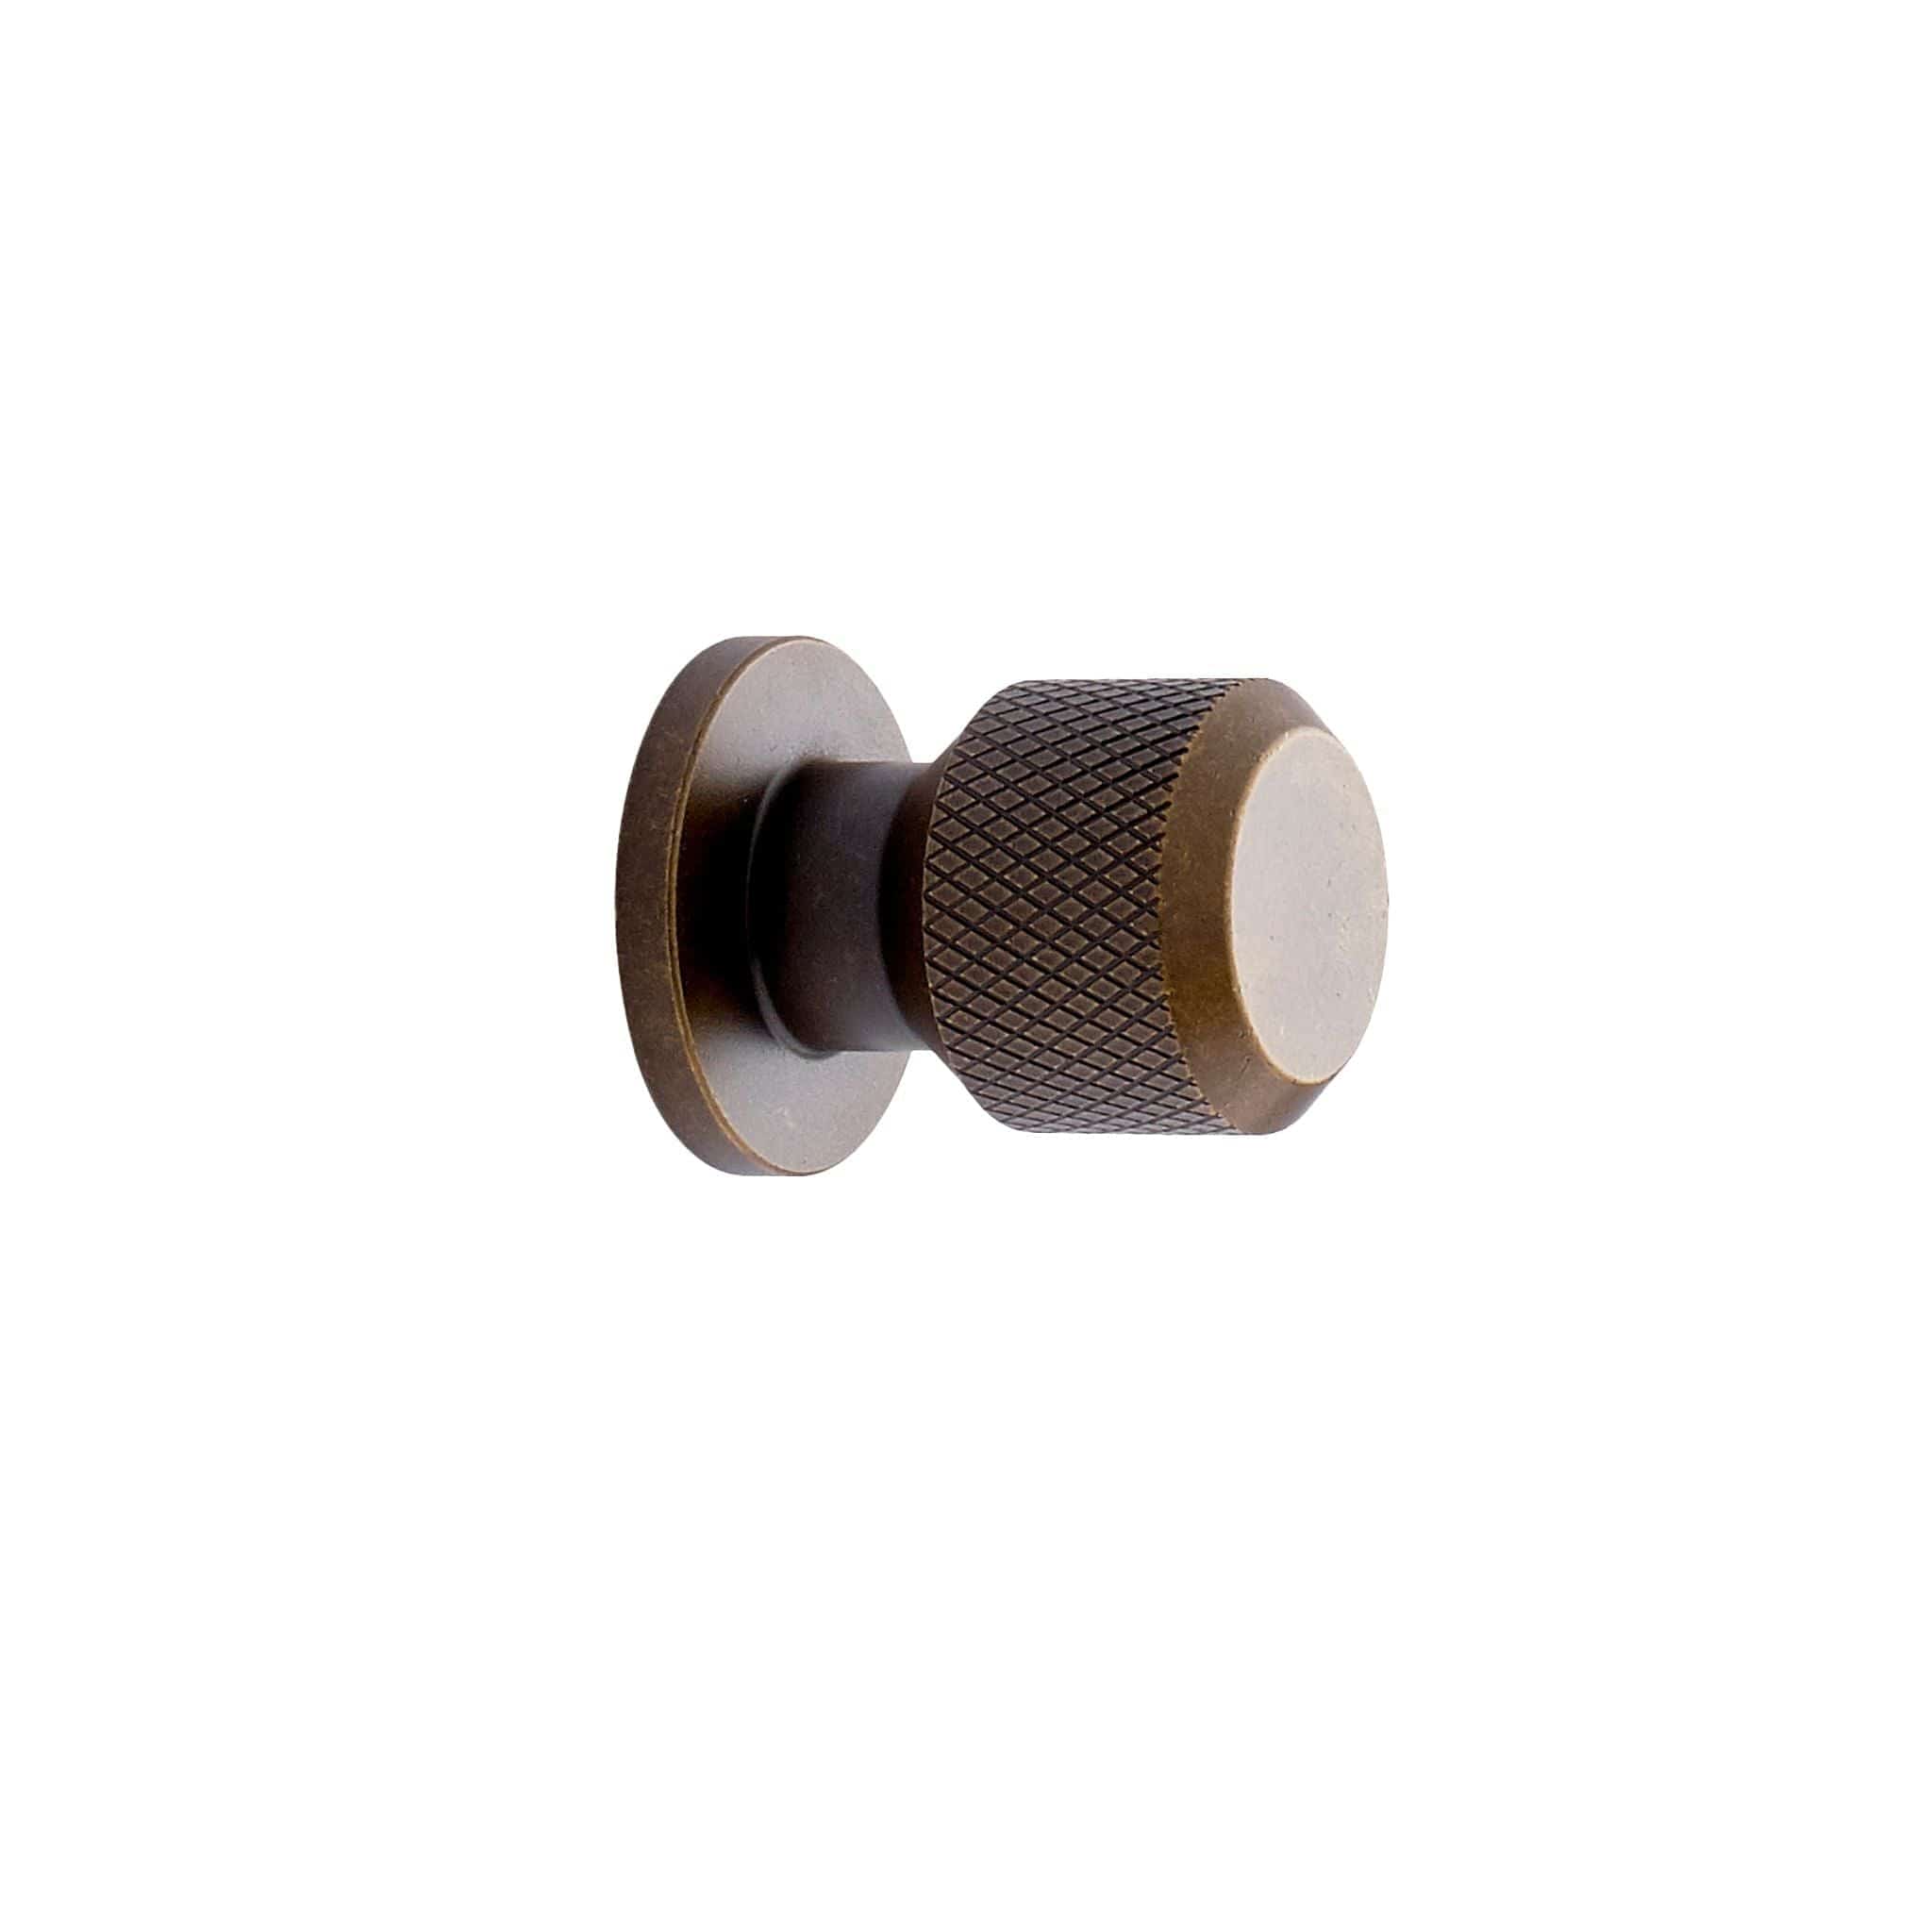 Manor Round | Knop i Antik Messing Ø 30 mm Furnipart FP-549220025-39 FINICC